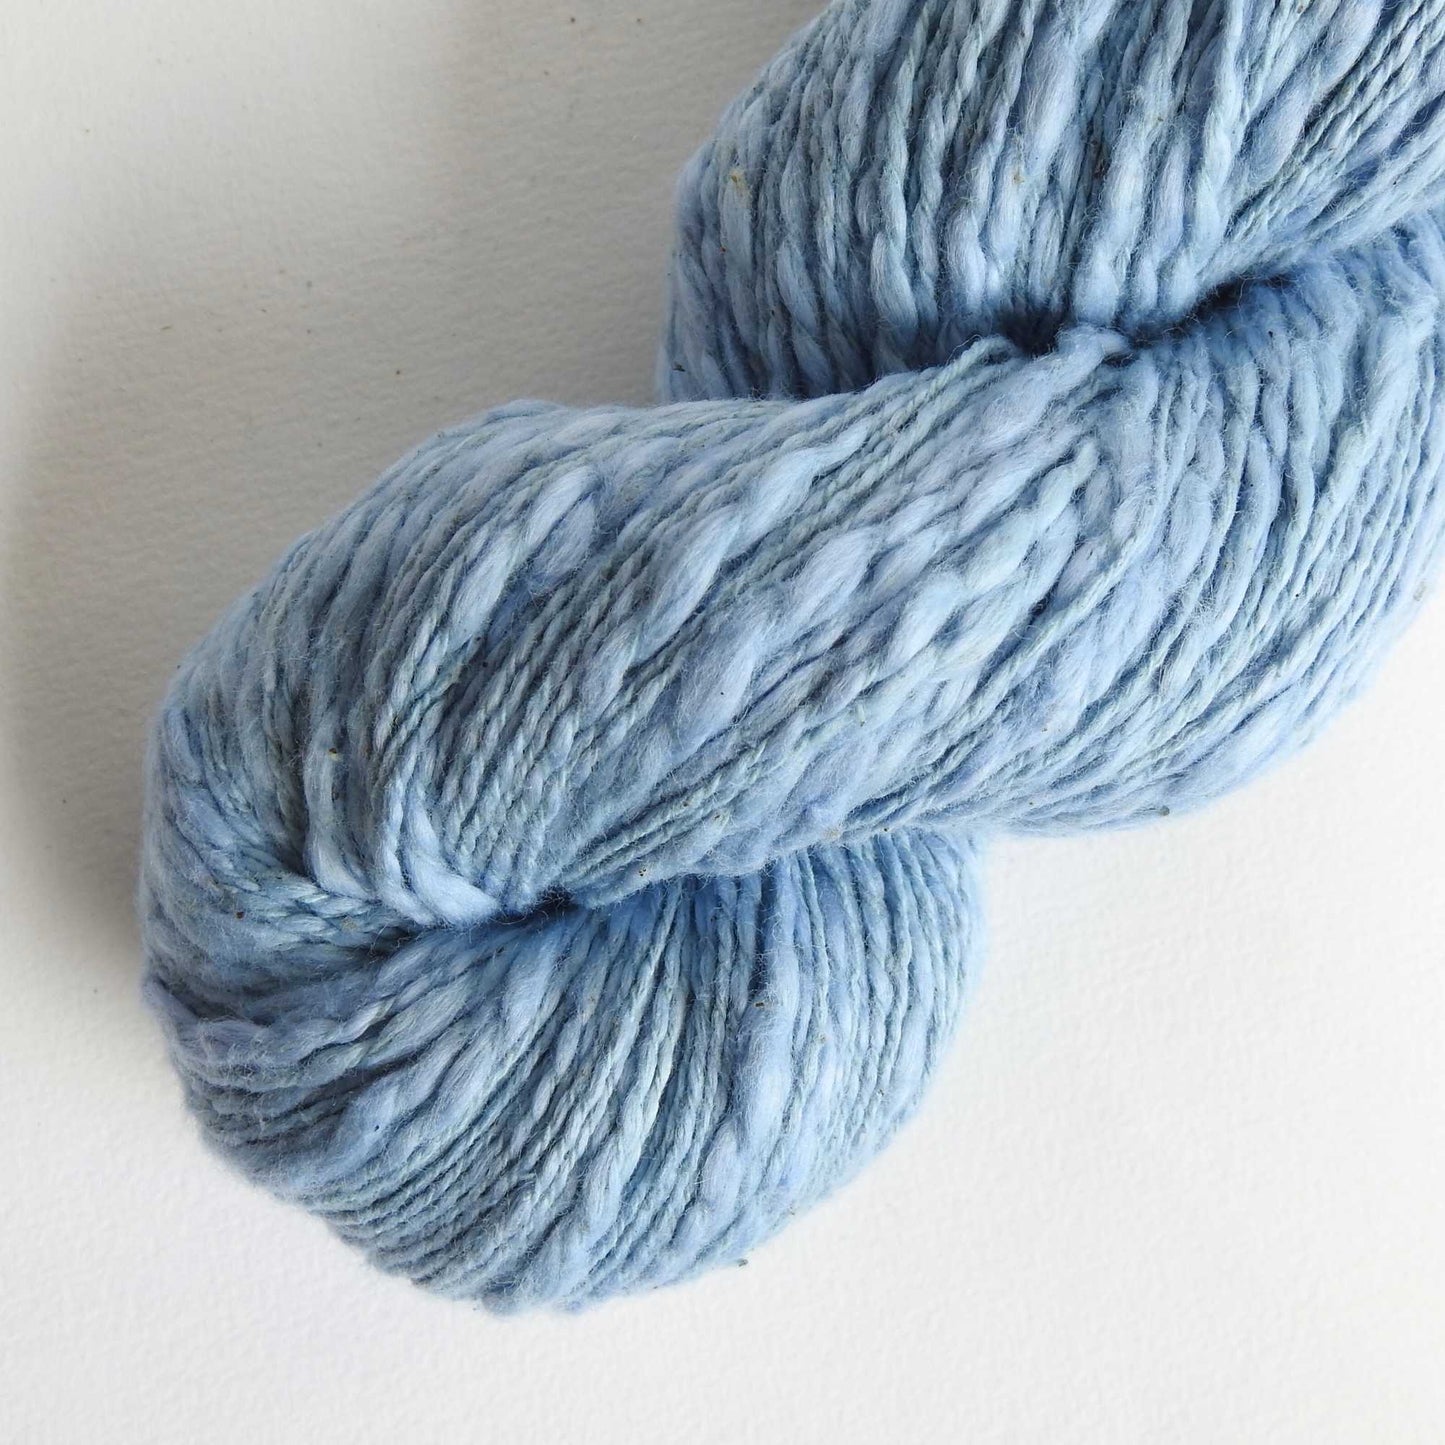 
                  
                    Skein of organic natural Cotton yarn in soft blue. Cotton yarn is super soft with a slight slub for texture. Cotton knitting yarn Australia in off white. For knitting, weaving and crochet
                  
                